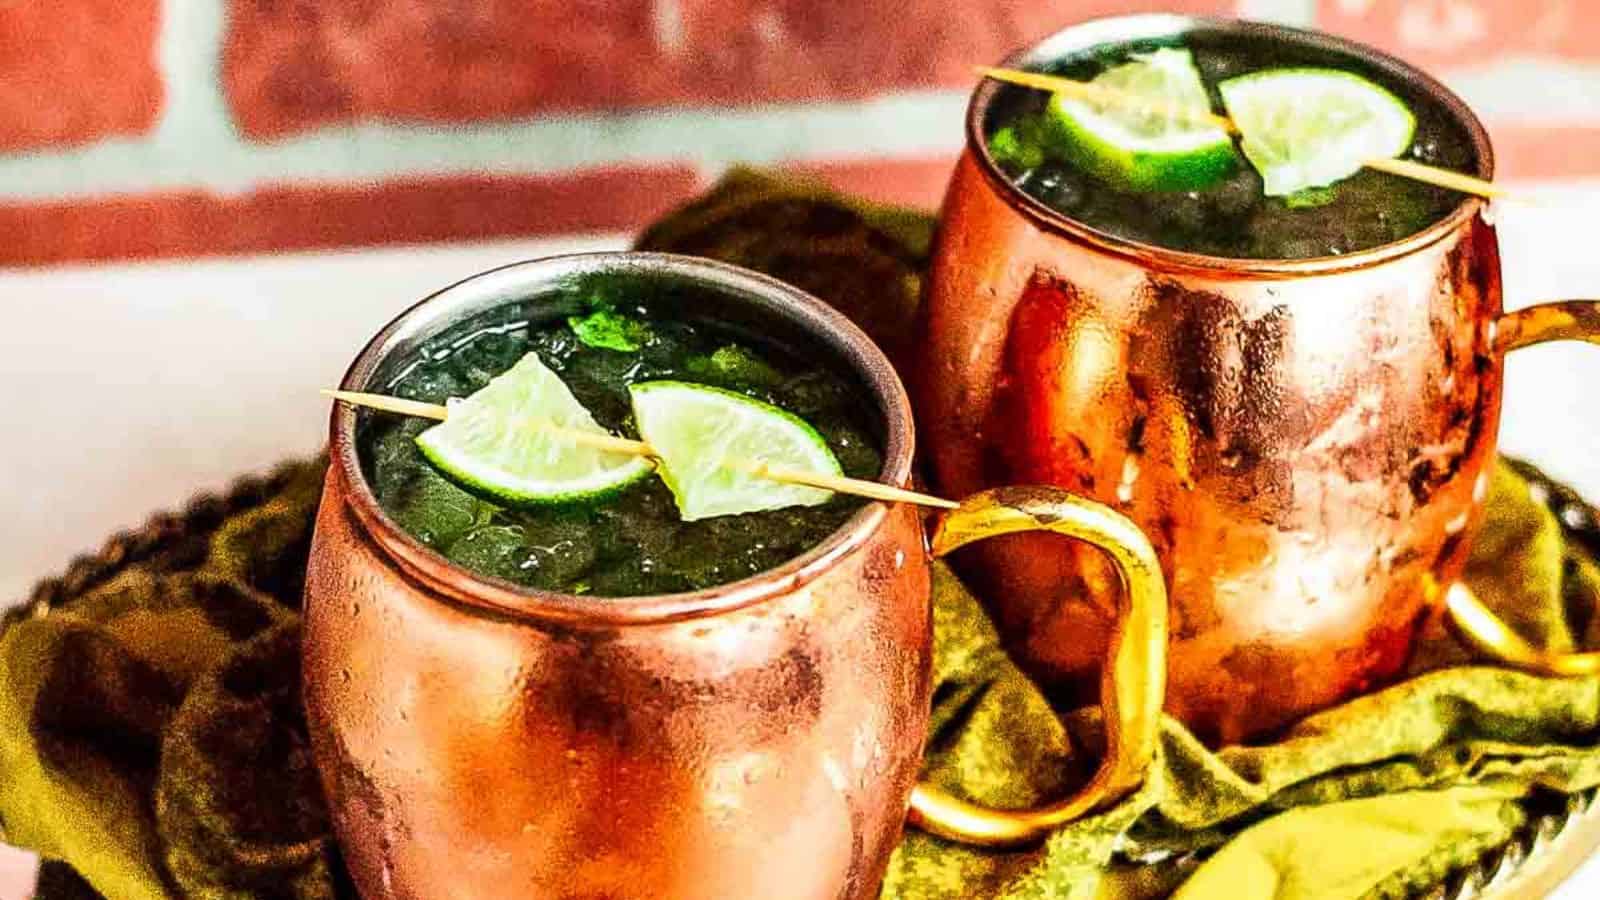 Two virgin moscow mules garnished with lime on a gold platter.